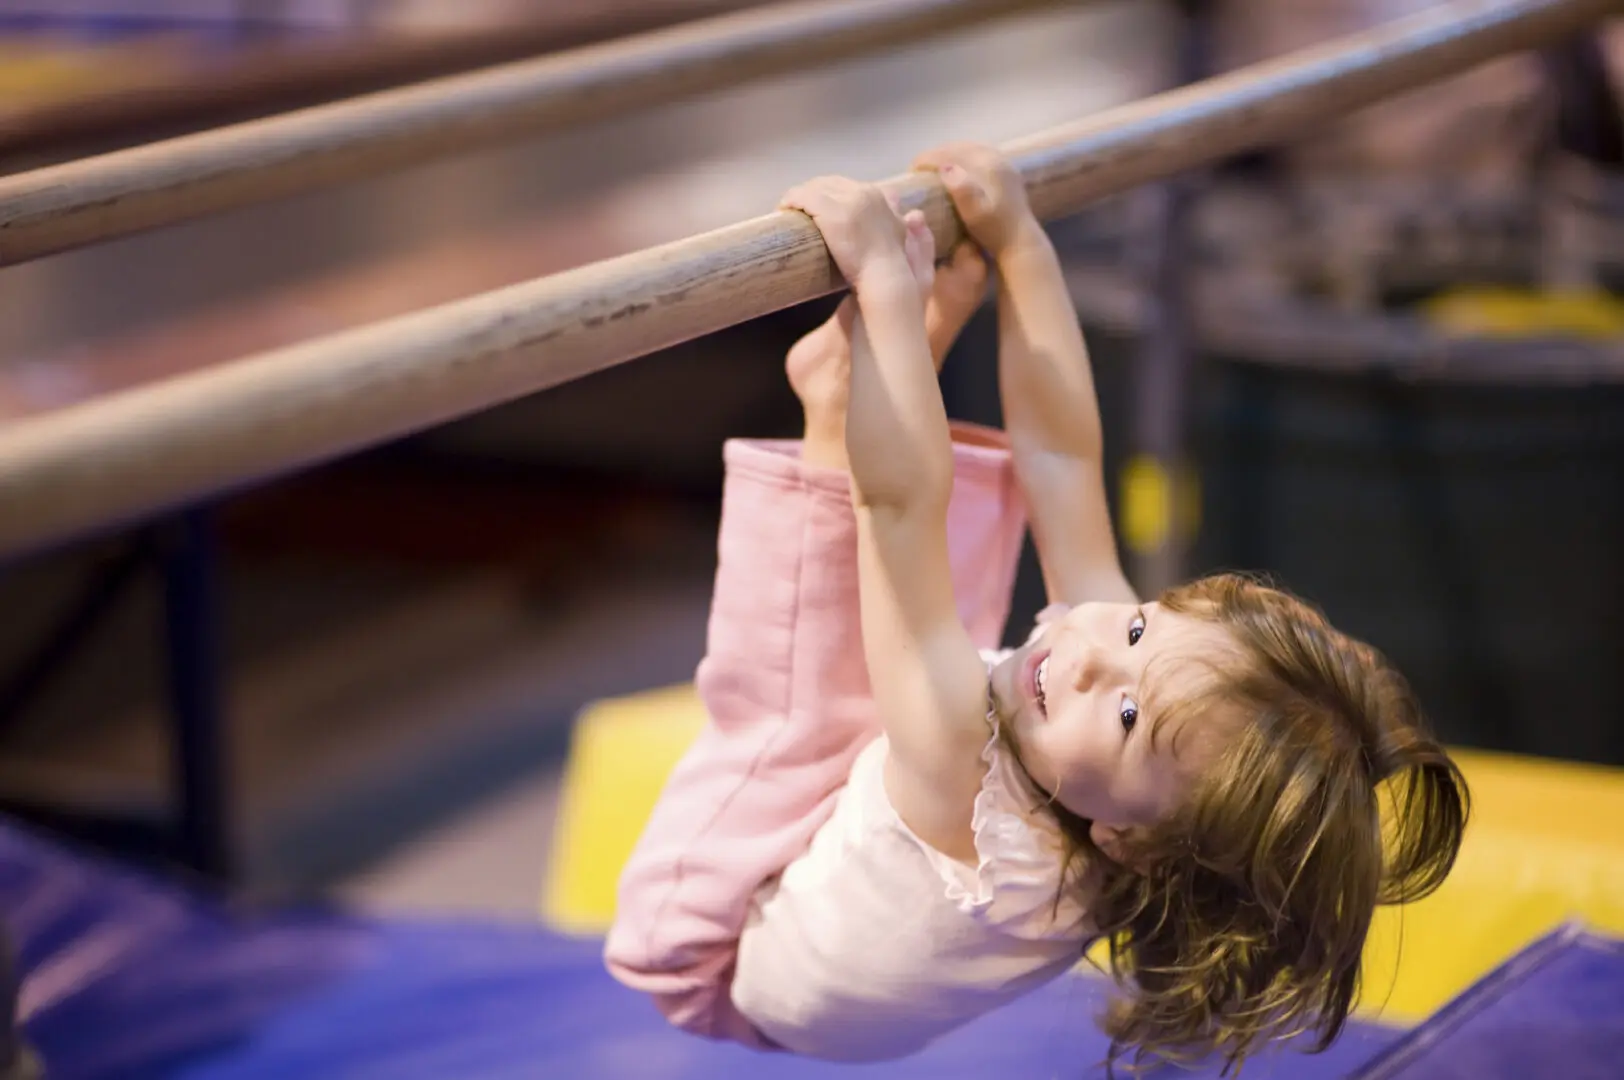 Young girl, aged 2, proving it is never to early to start having fun and practicing good physical fitness. She is pulling herself up on uneven bars. Blue and yellow mats defocused in the background. Shallow DOF provides good subject isolation, focus on her eyes.